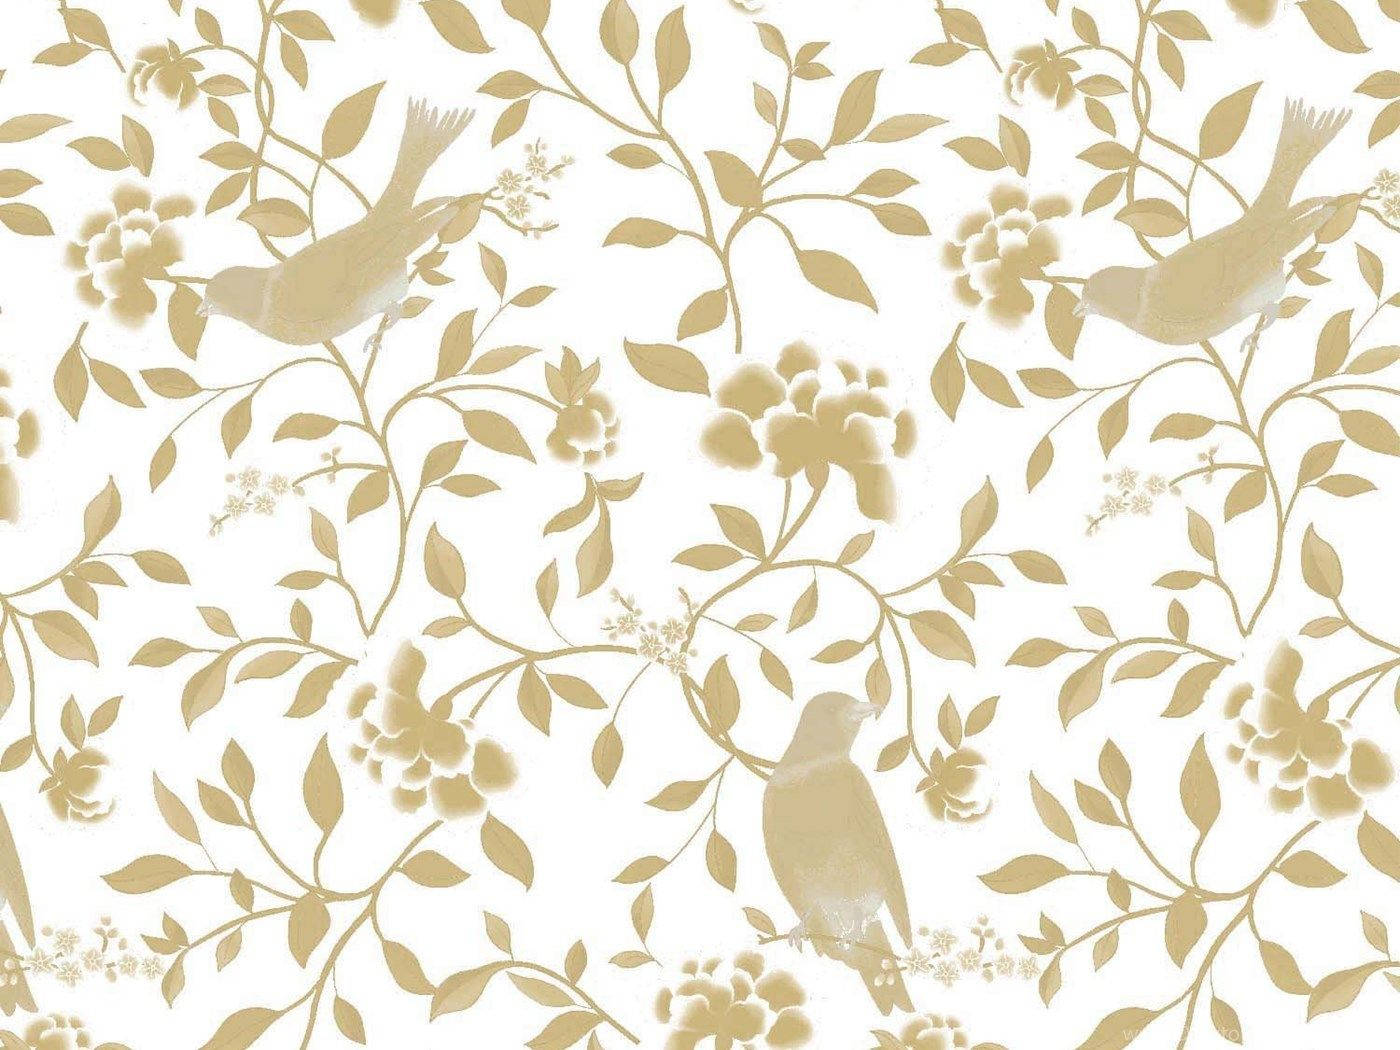 Free White And Gold Wallpaper Downloads, [100+] White And Gold Wallpapers  for FREE 